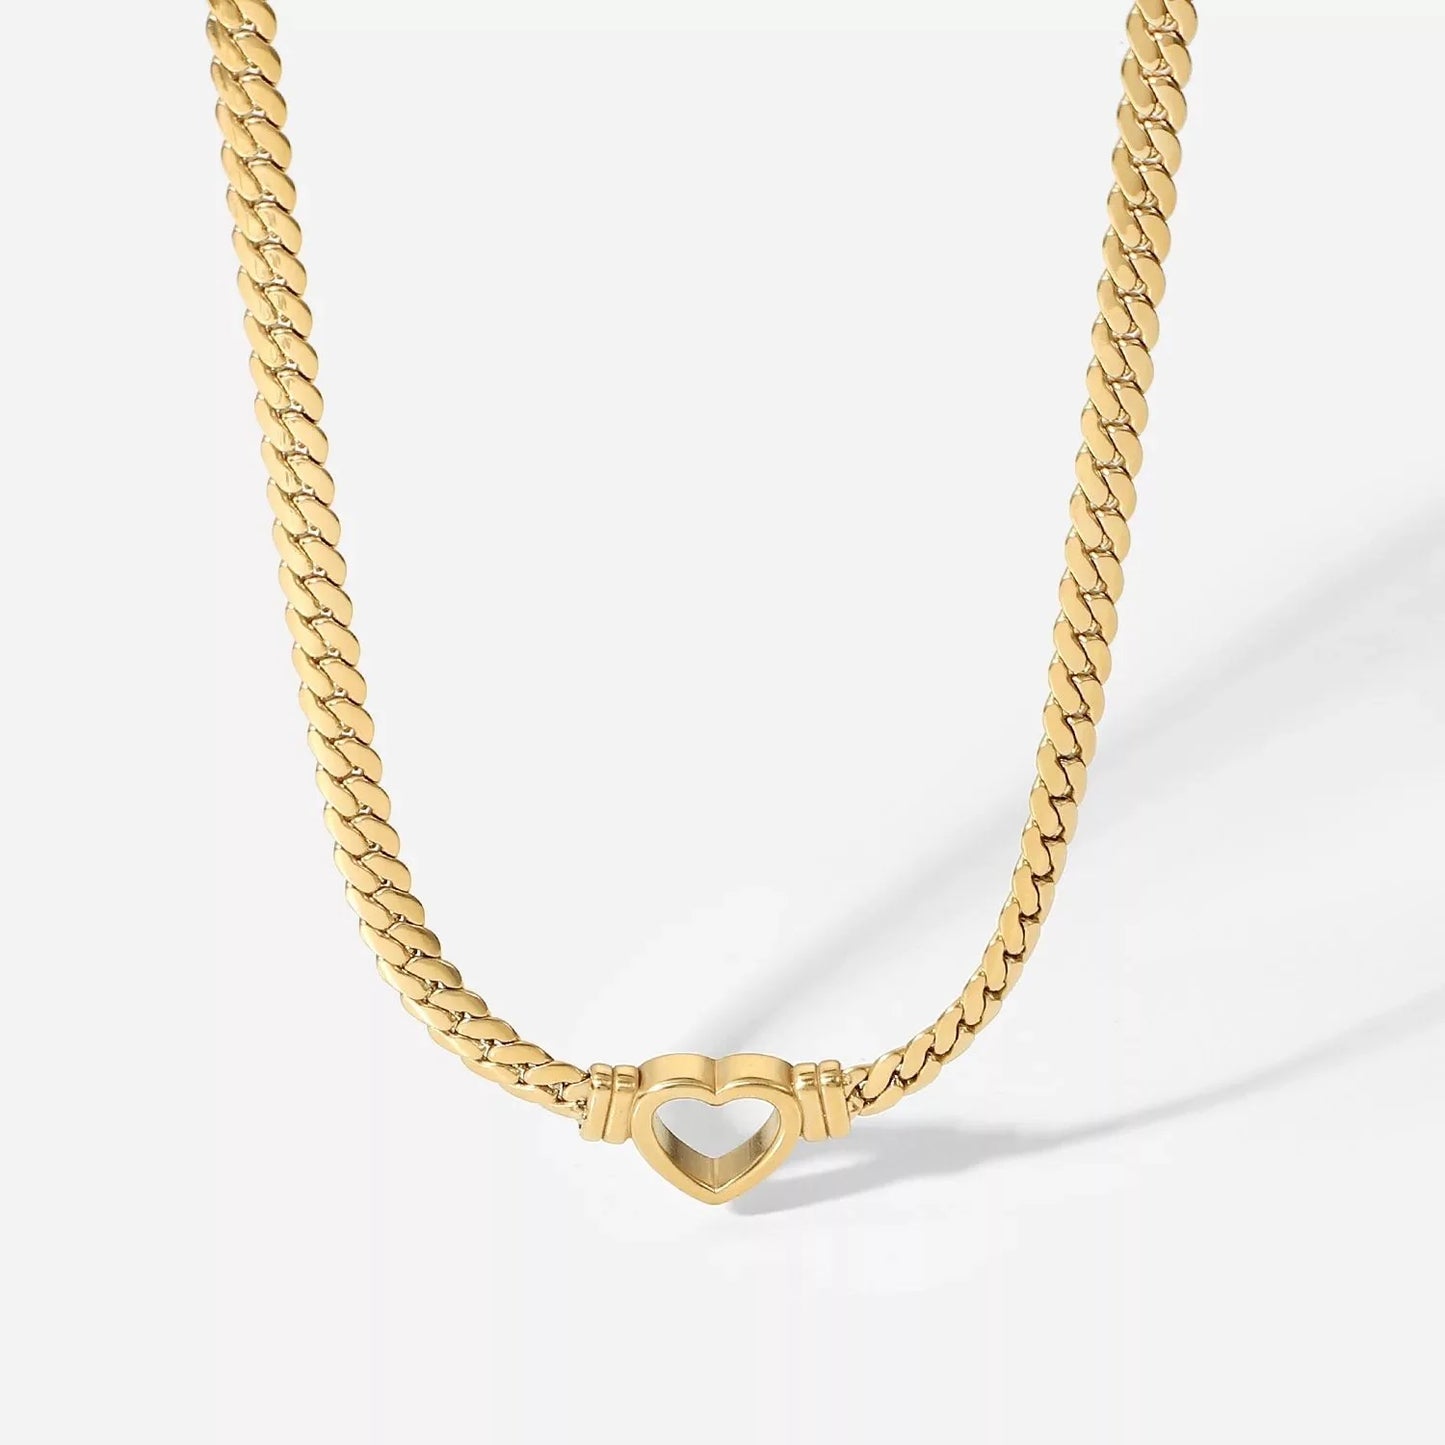 Hollow heart necklace